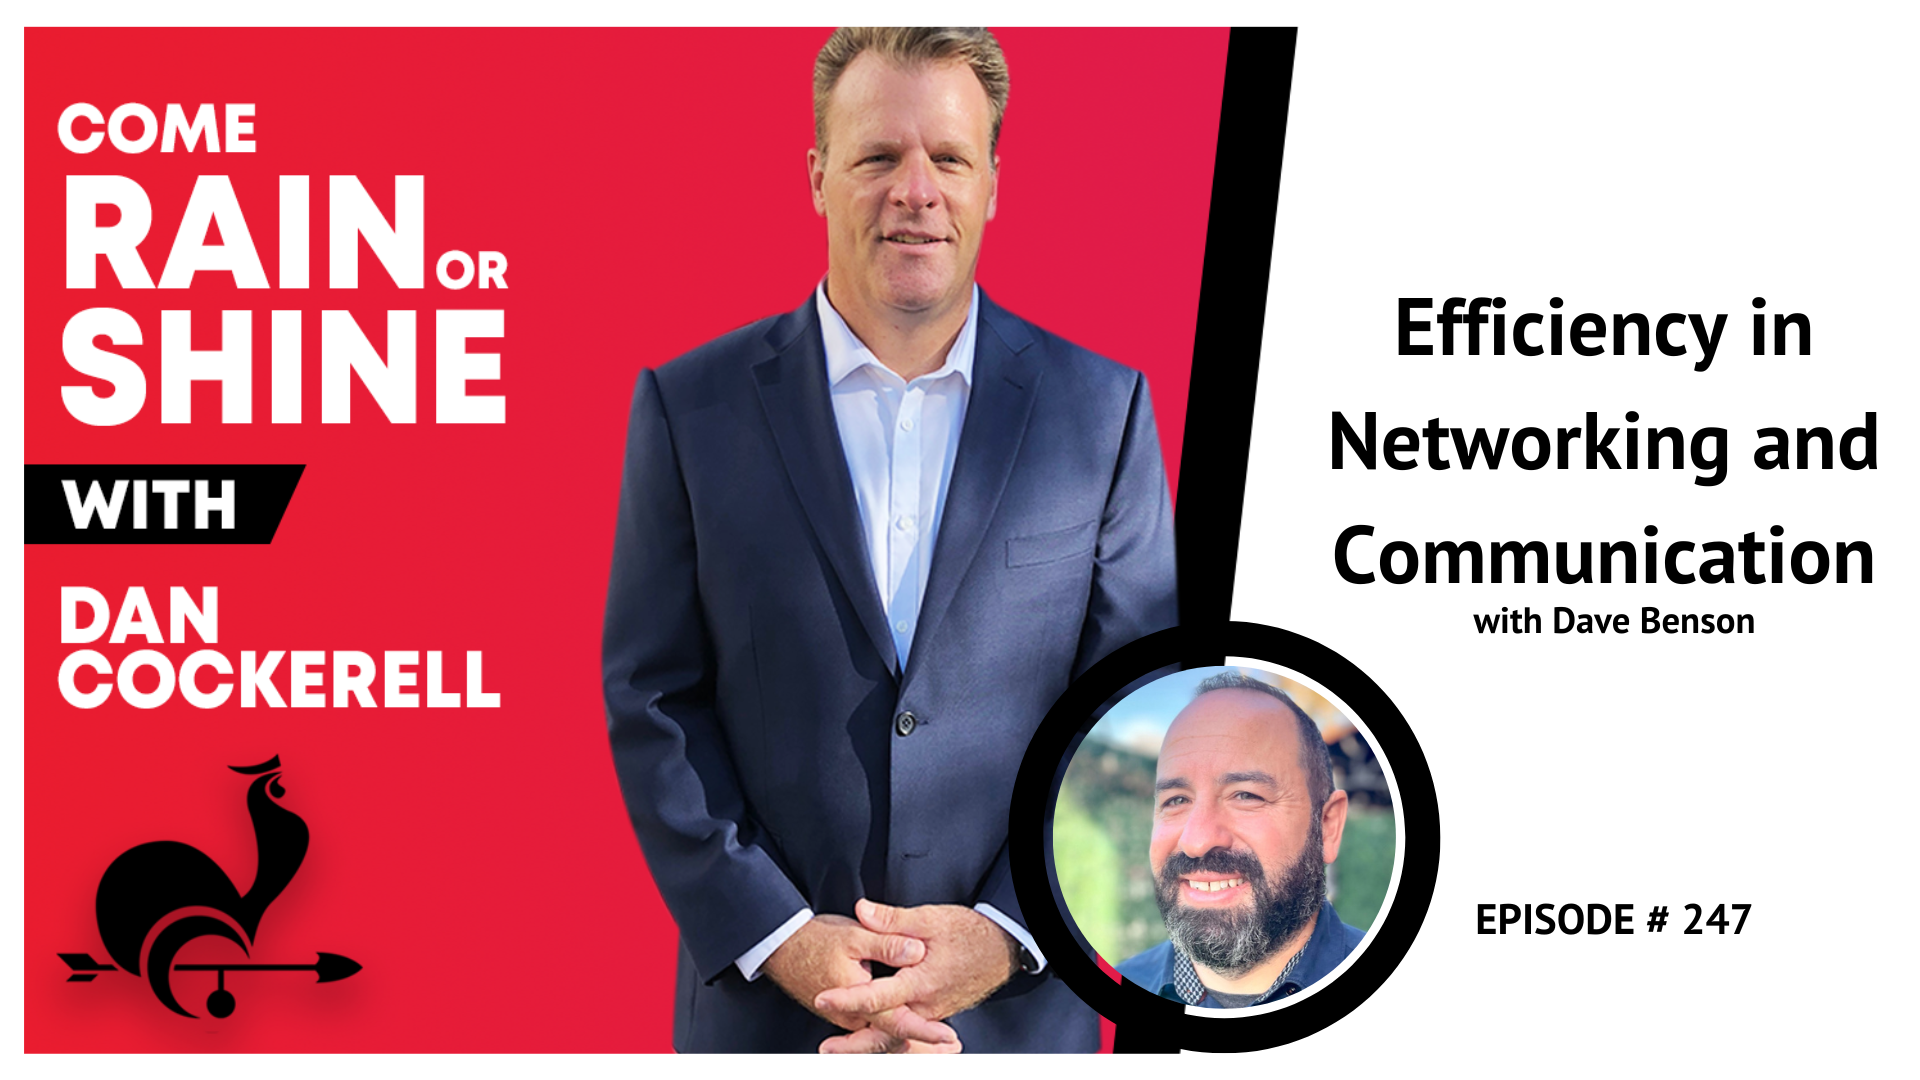 Come Rain or Shine Episode 247 Dave Benson Efficiency in Networking and Communication